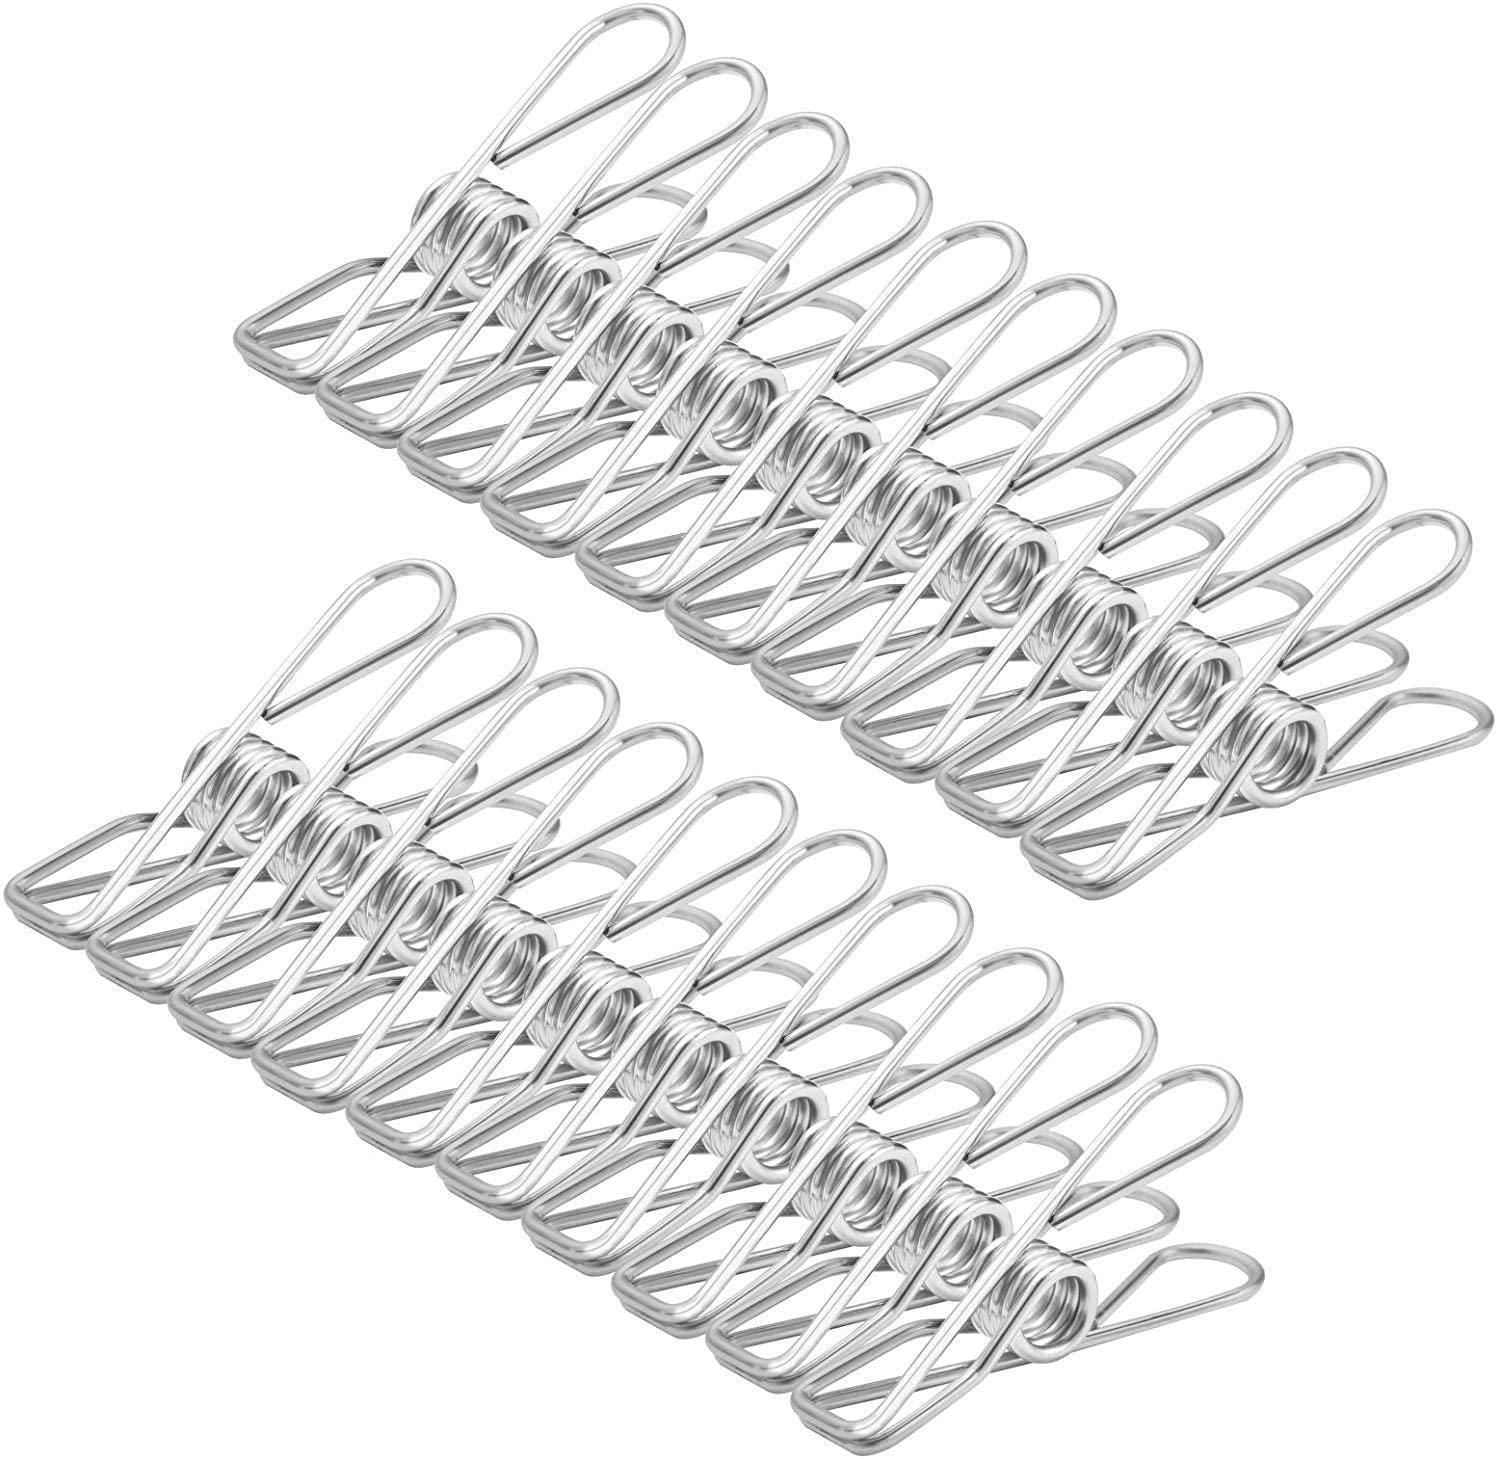 Laundry Pegs, 6CM 2.36inch Stainless Steel Pegs Clothes Pins ,Metal Hanging Clips, Stainless Steel Laundry Hanging Clothesline Clips for Clothes, Paper Files, Snacks Seal(Pack of 60)